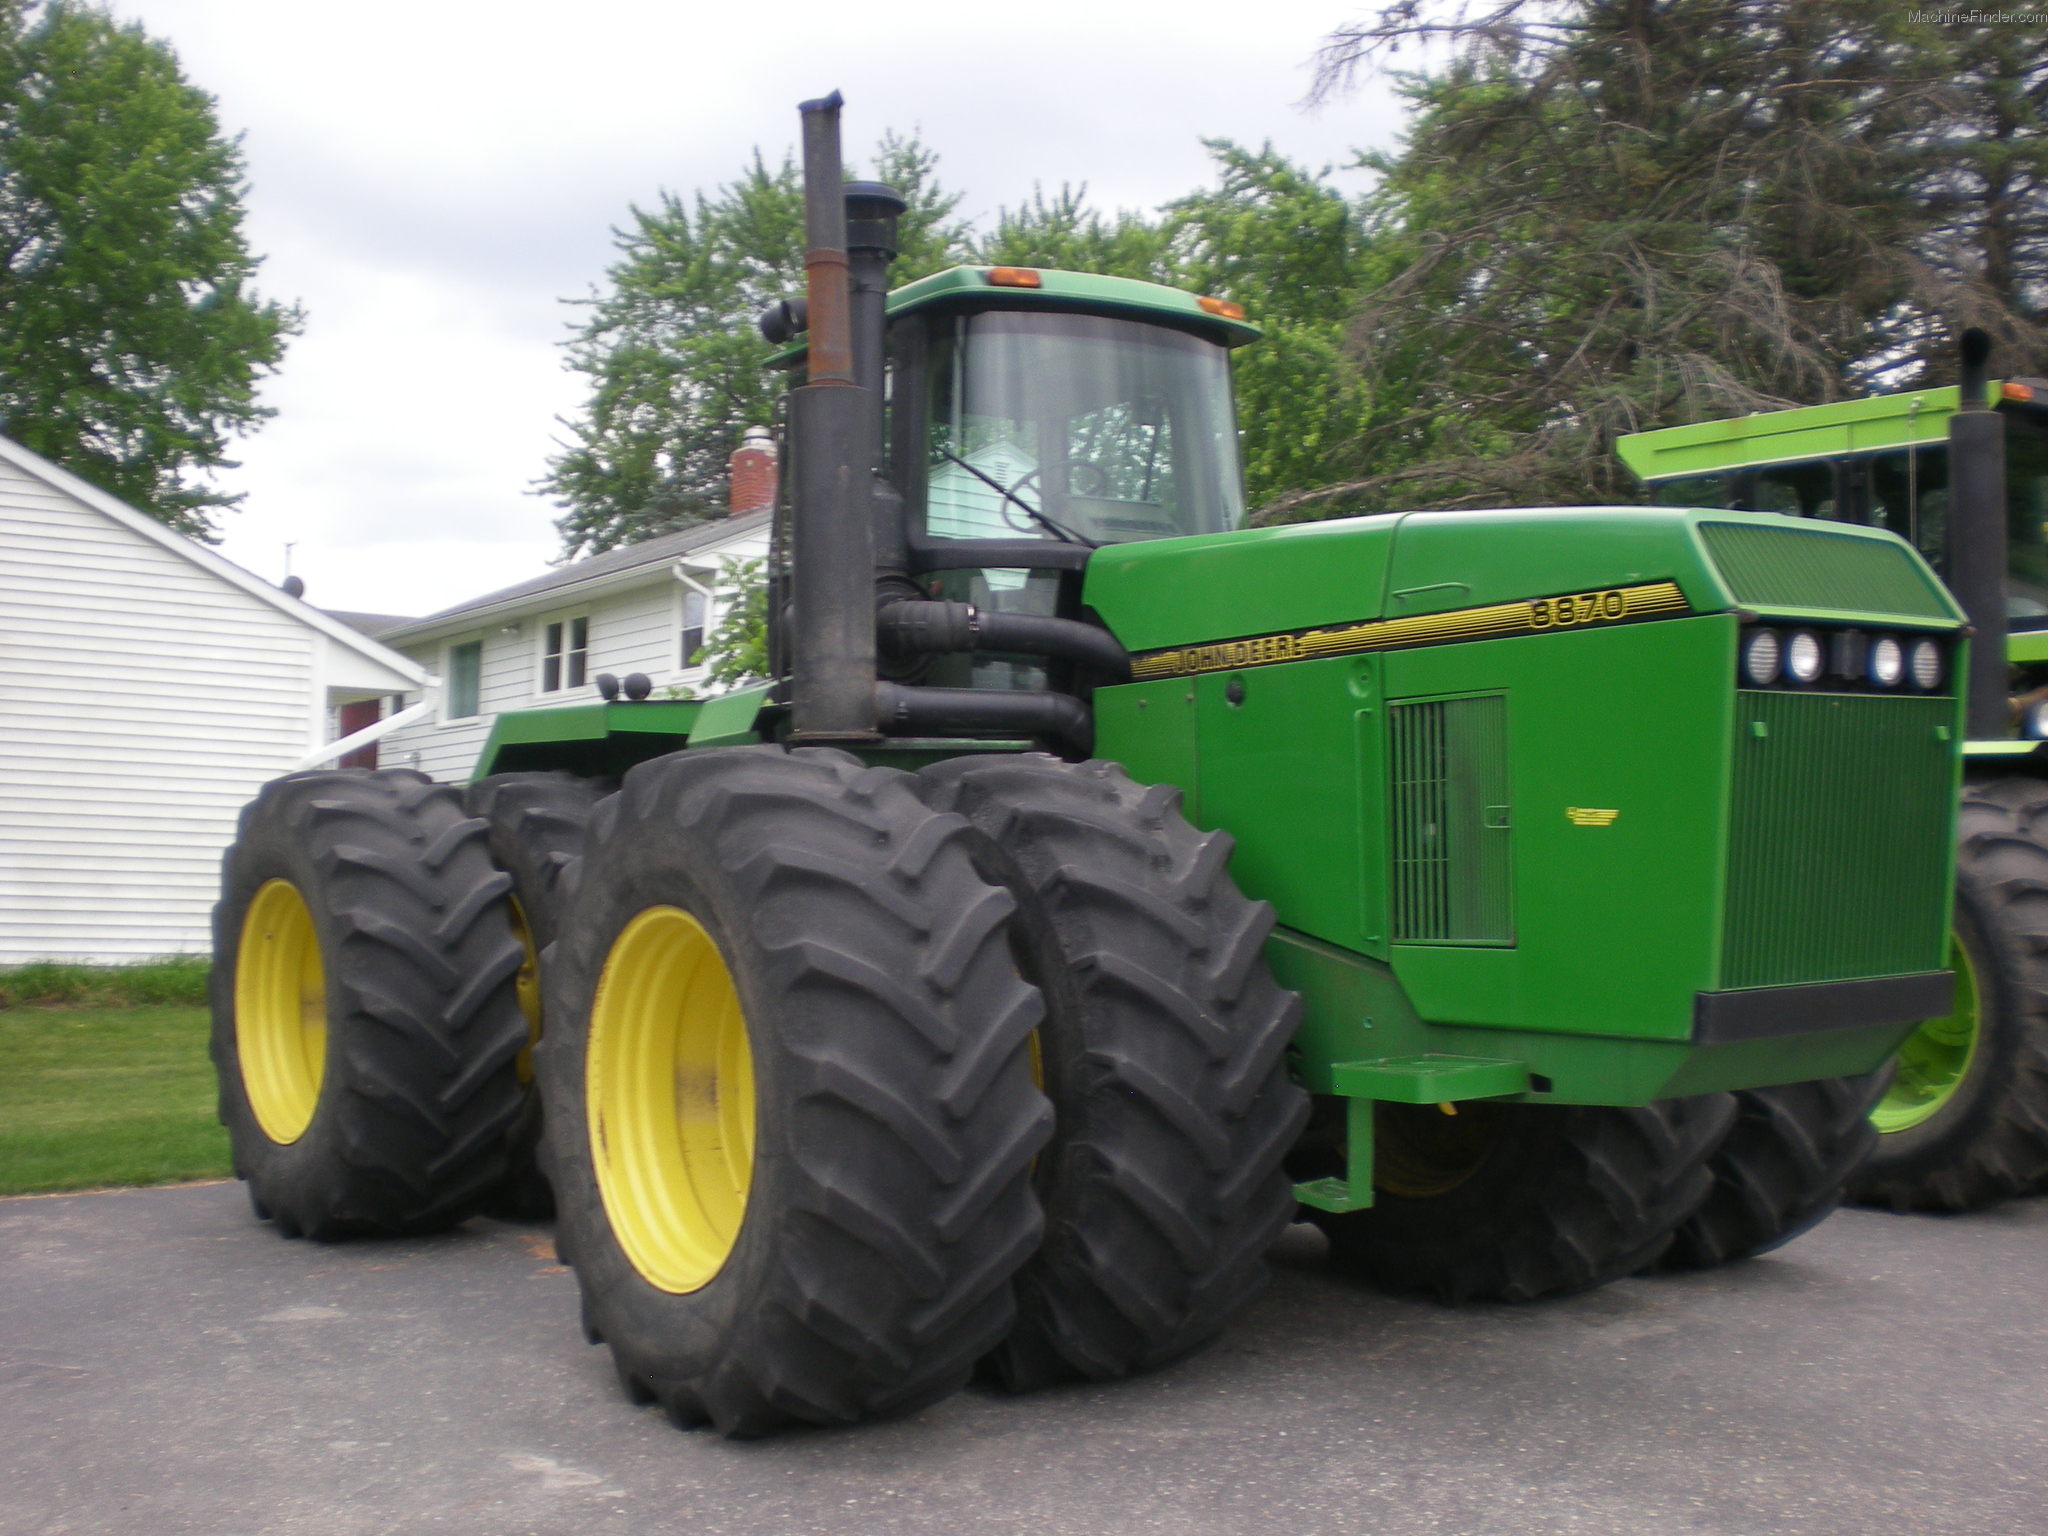 Image Gallery: A Review of the John Deere 8870